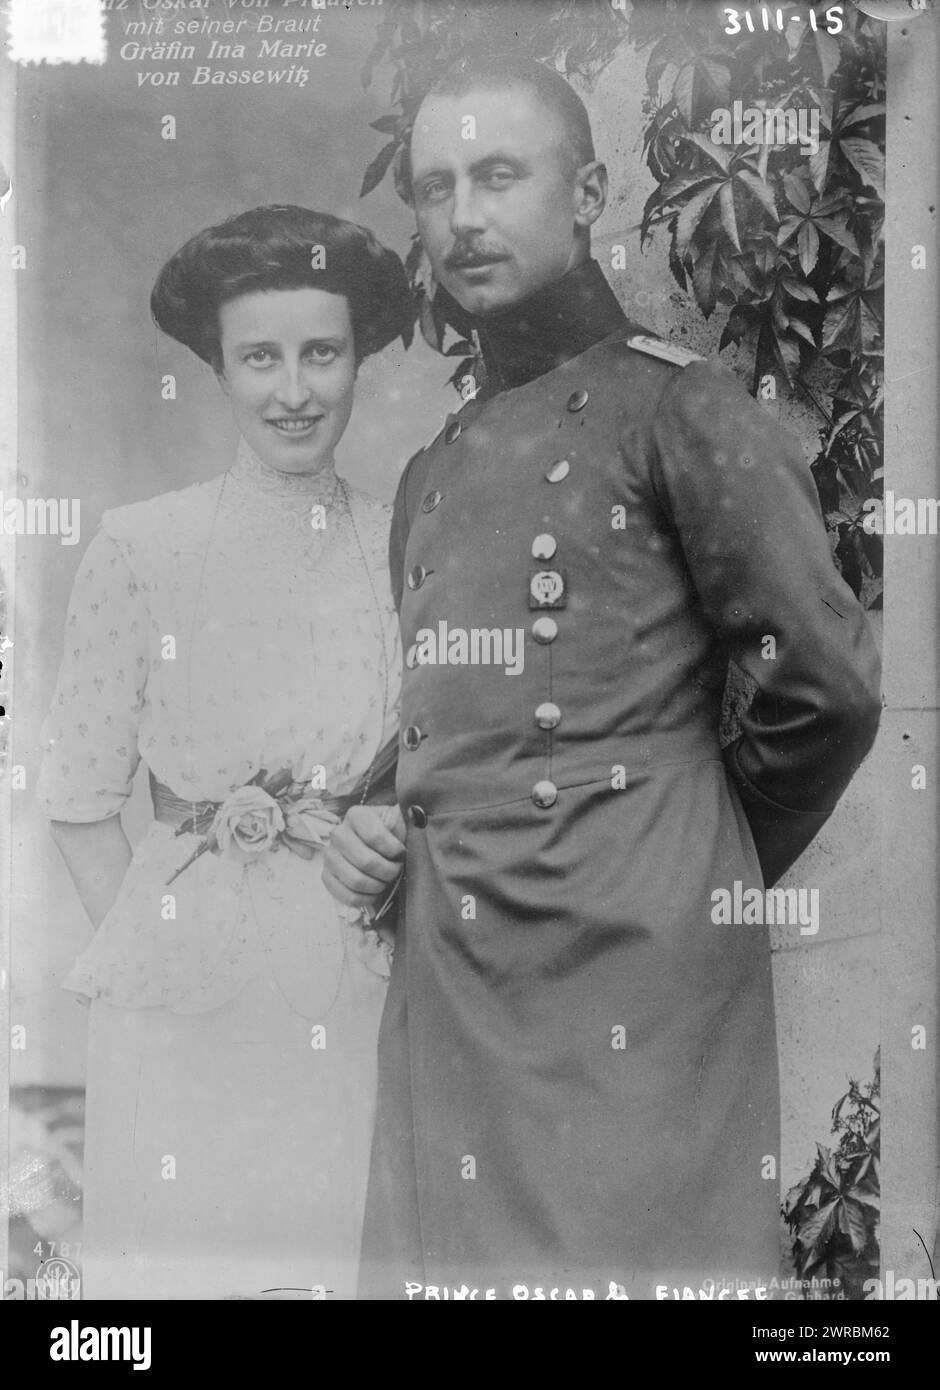 Prince Oscar & fiancee, Photo shows Countess Ina Marie von Bassewitz (1888-1973) with fiance Prince Oskar of Prussia (1888-1958)., between ca. 1910 and ca. 1915, Glass negatives, 1 negative: glass Stock Photo